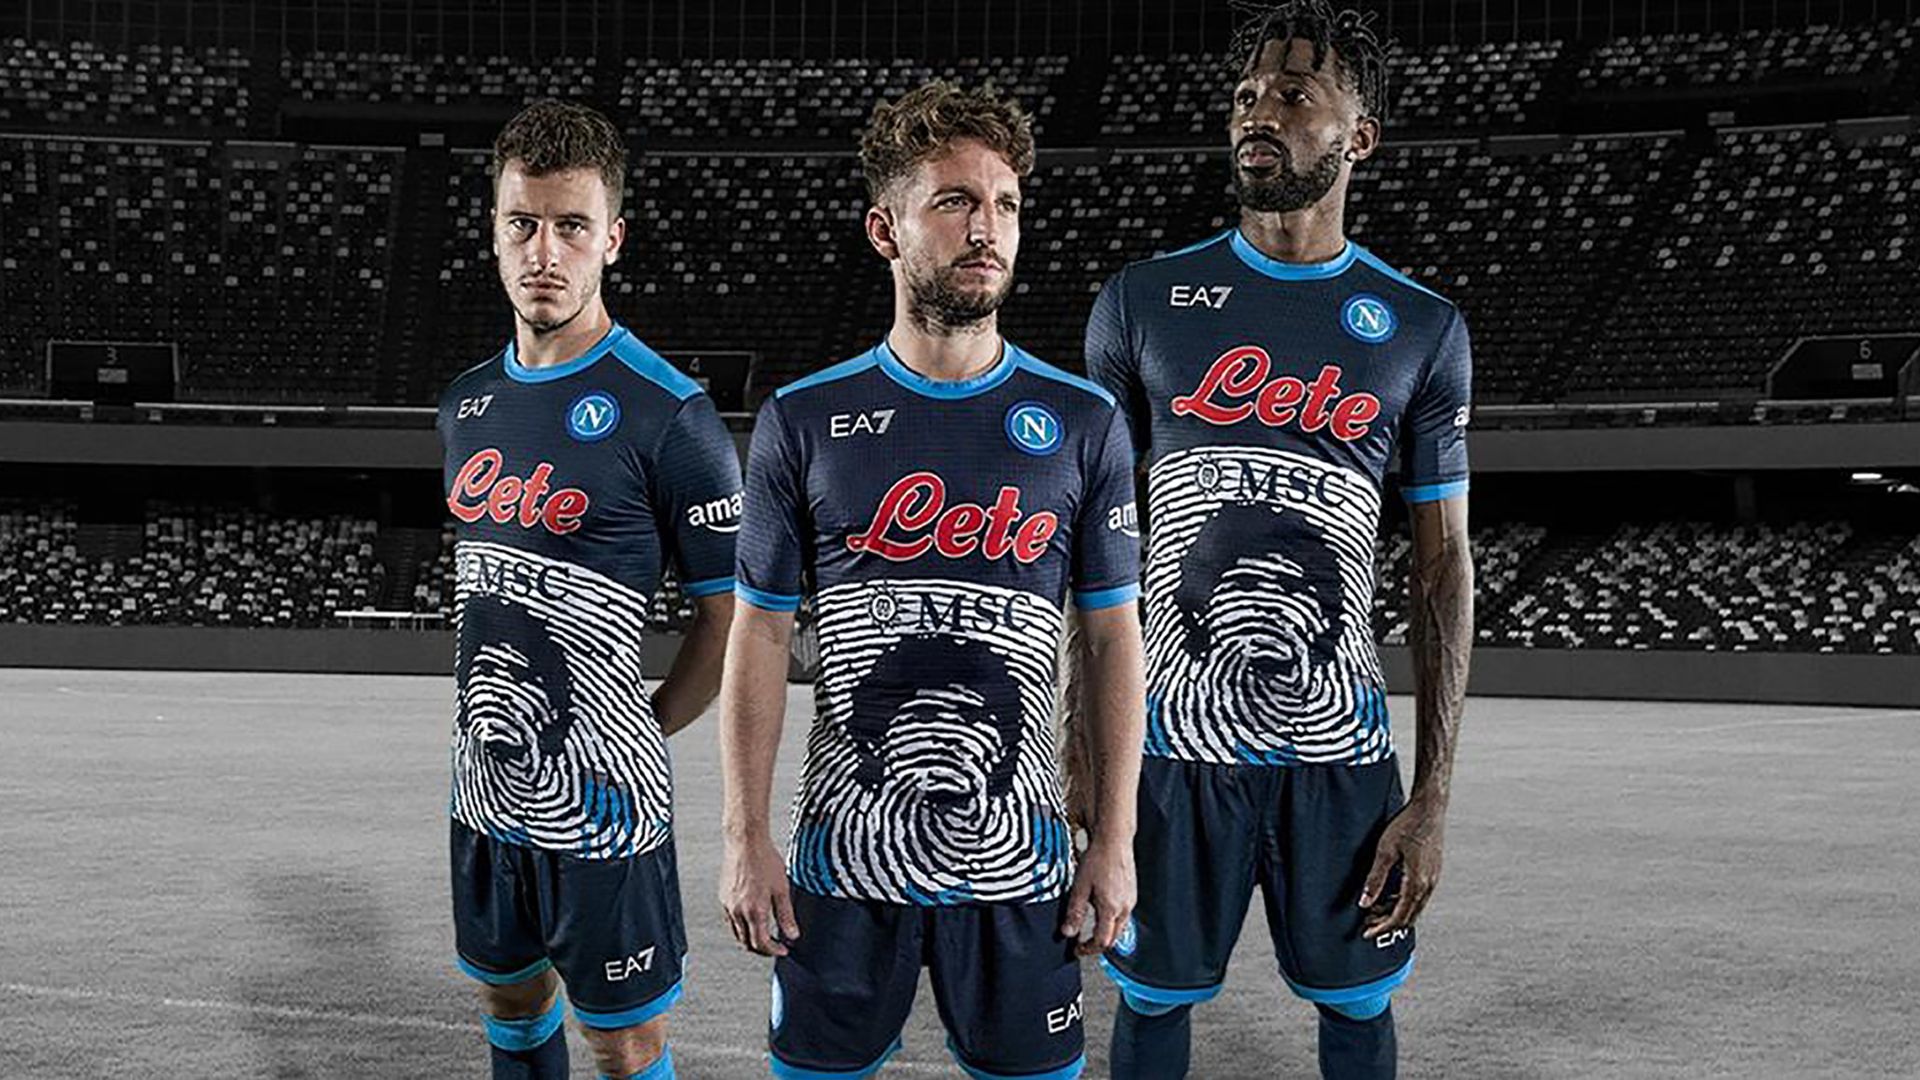 Napoli to wear Maradona tribute shirts in Serie A games